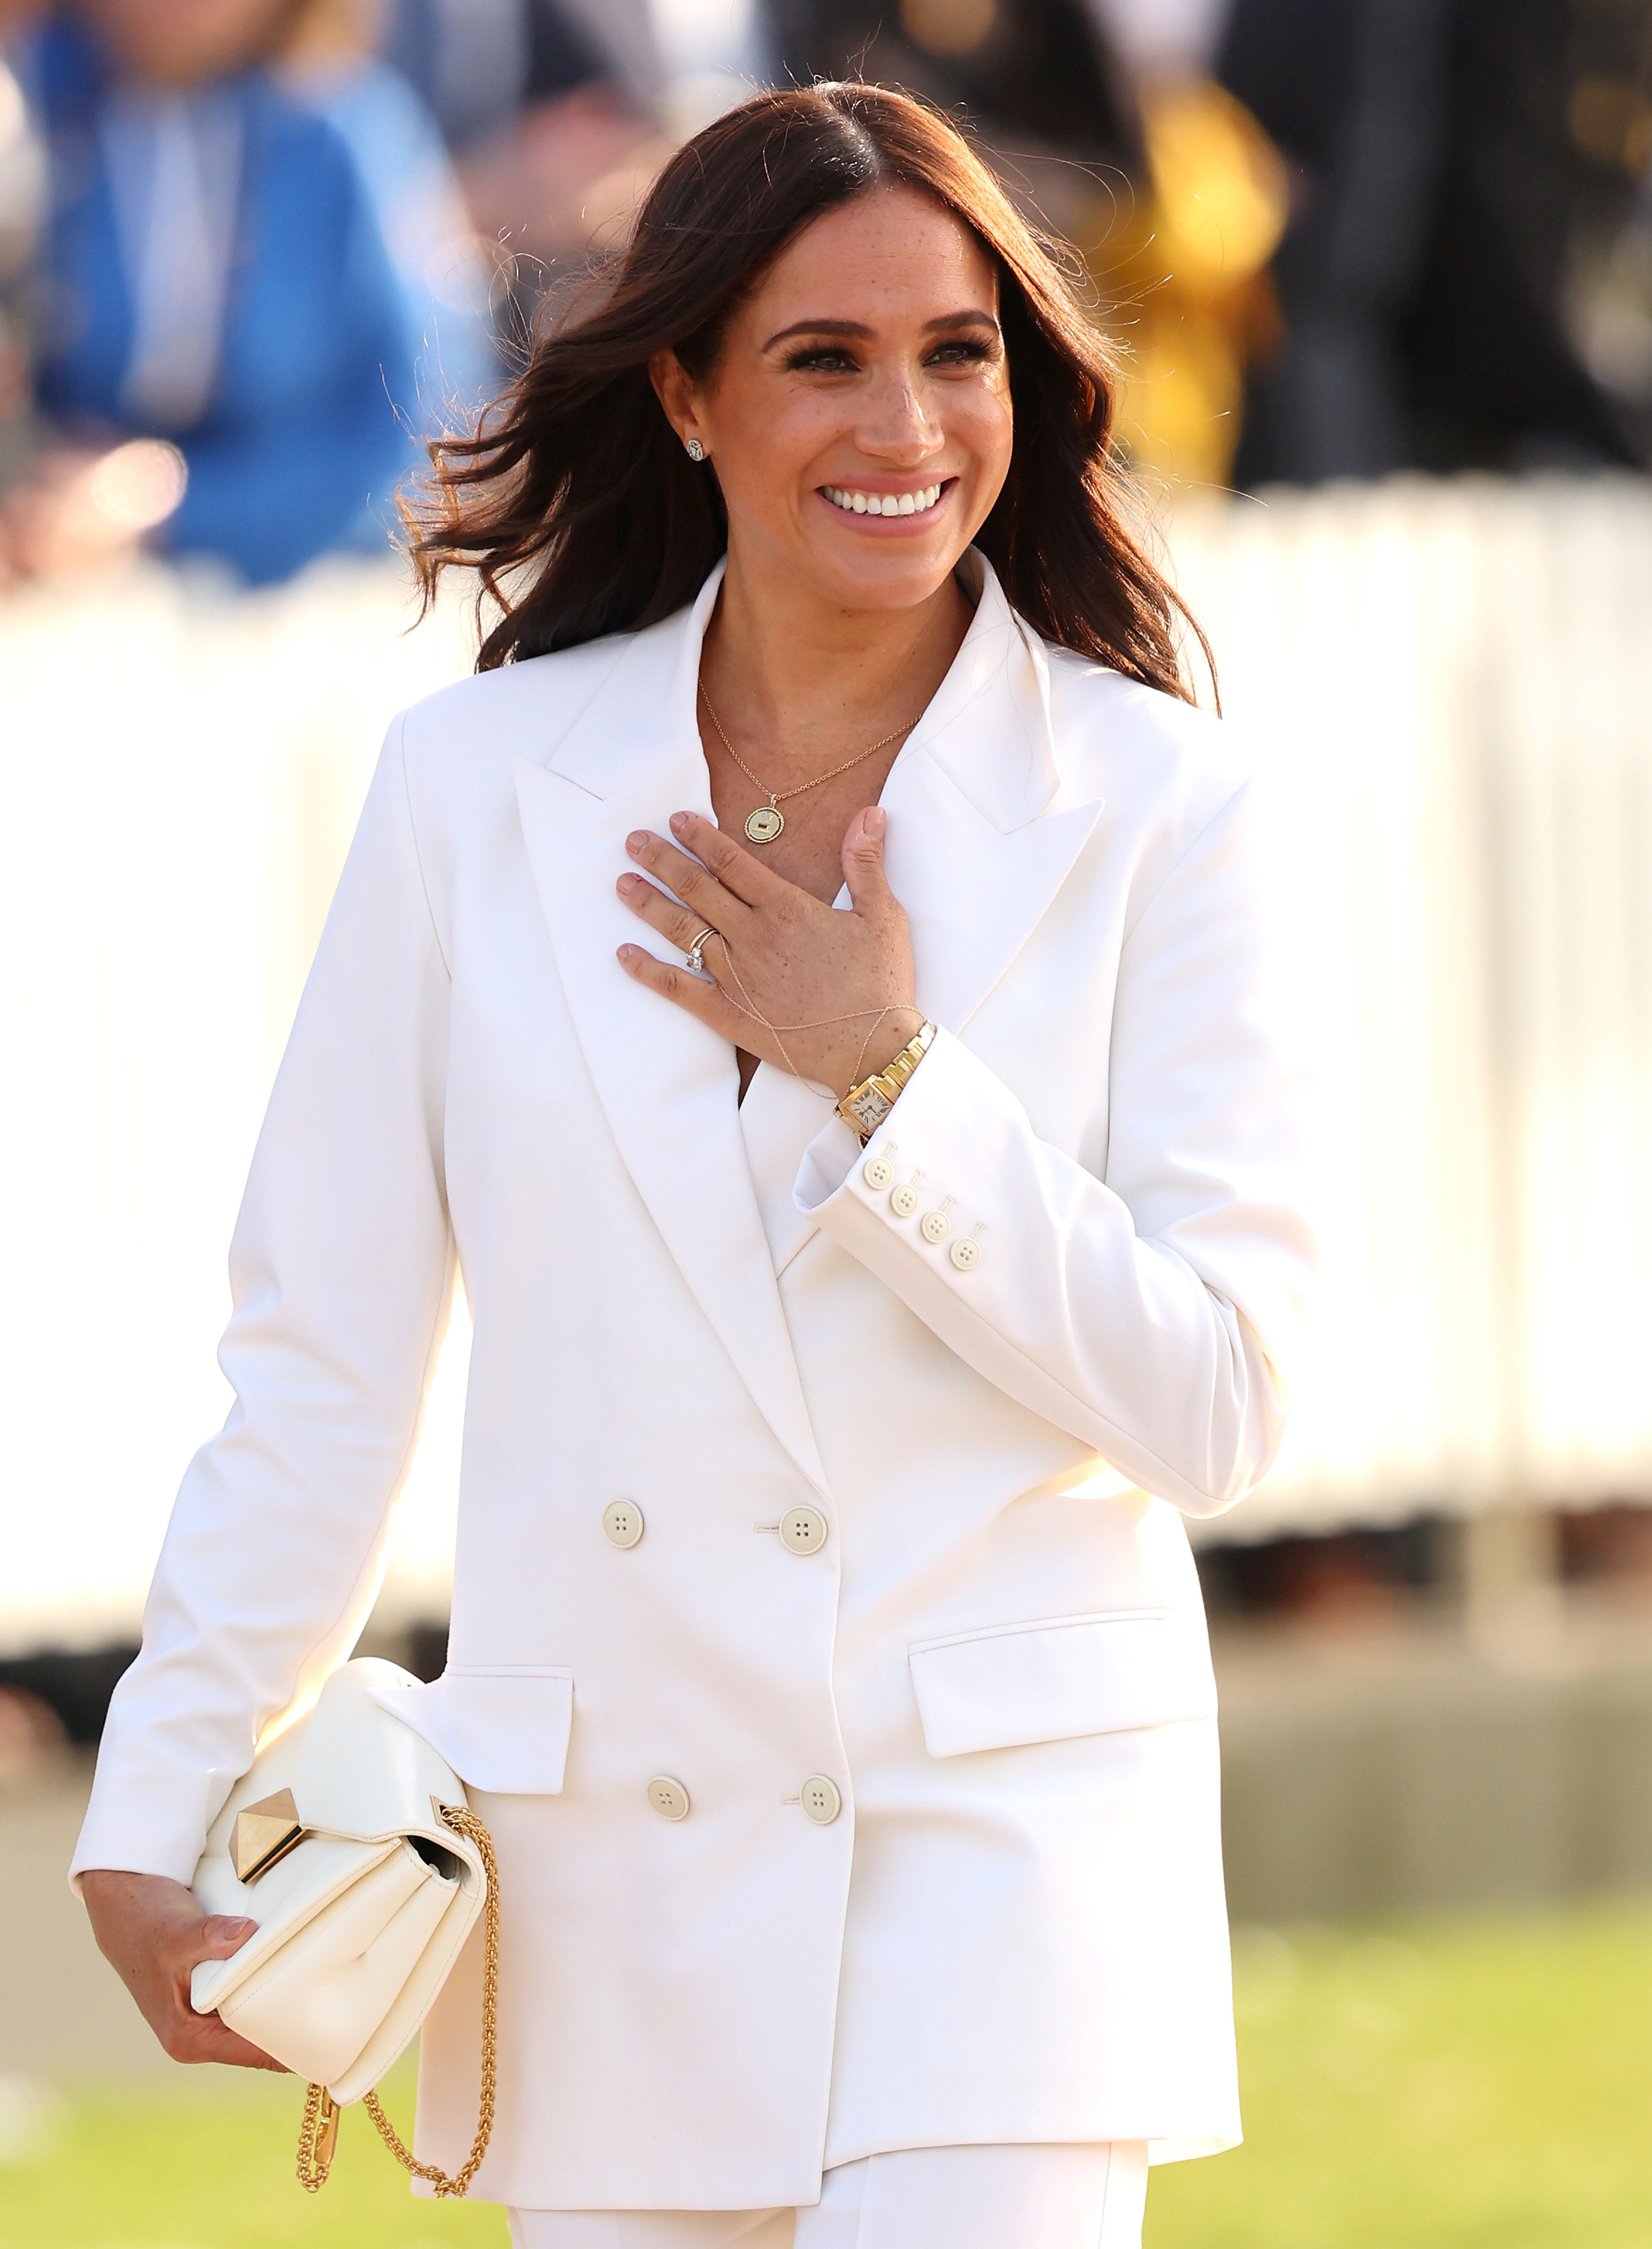 meghan at a royal event